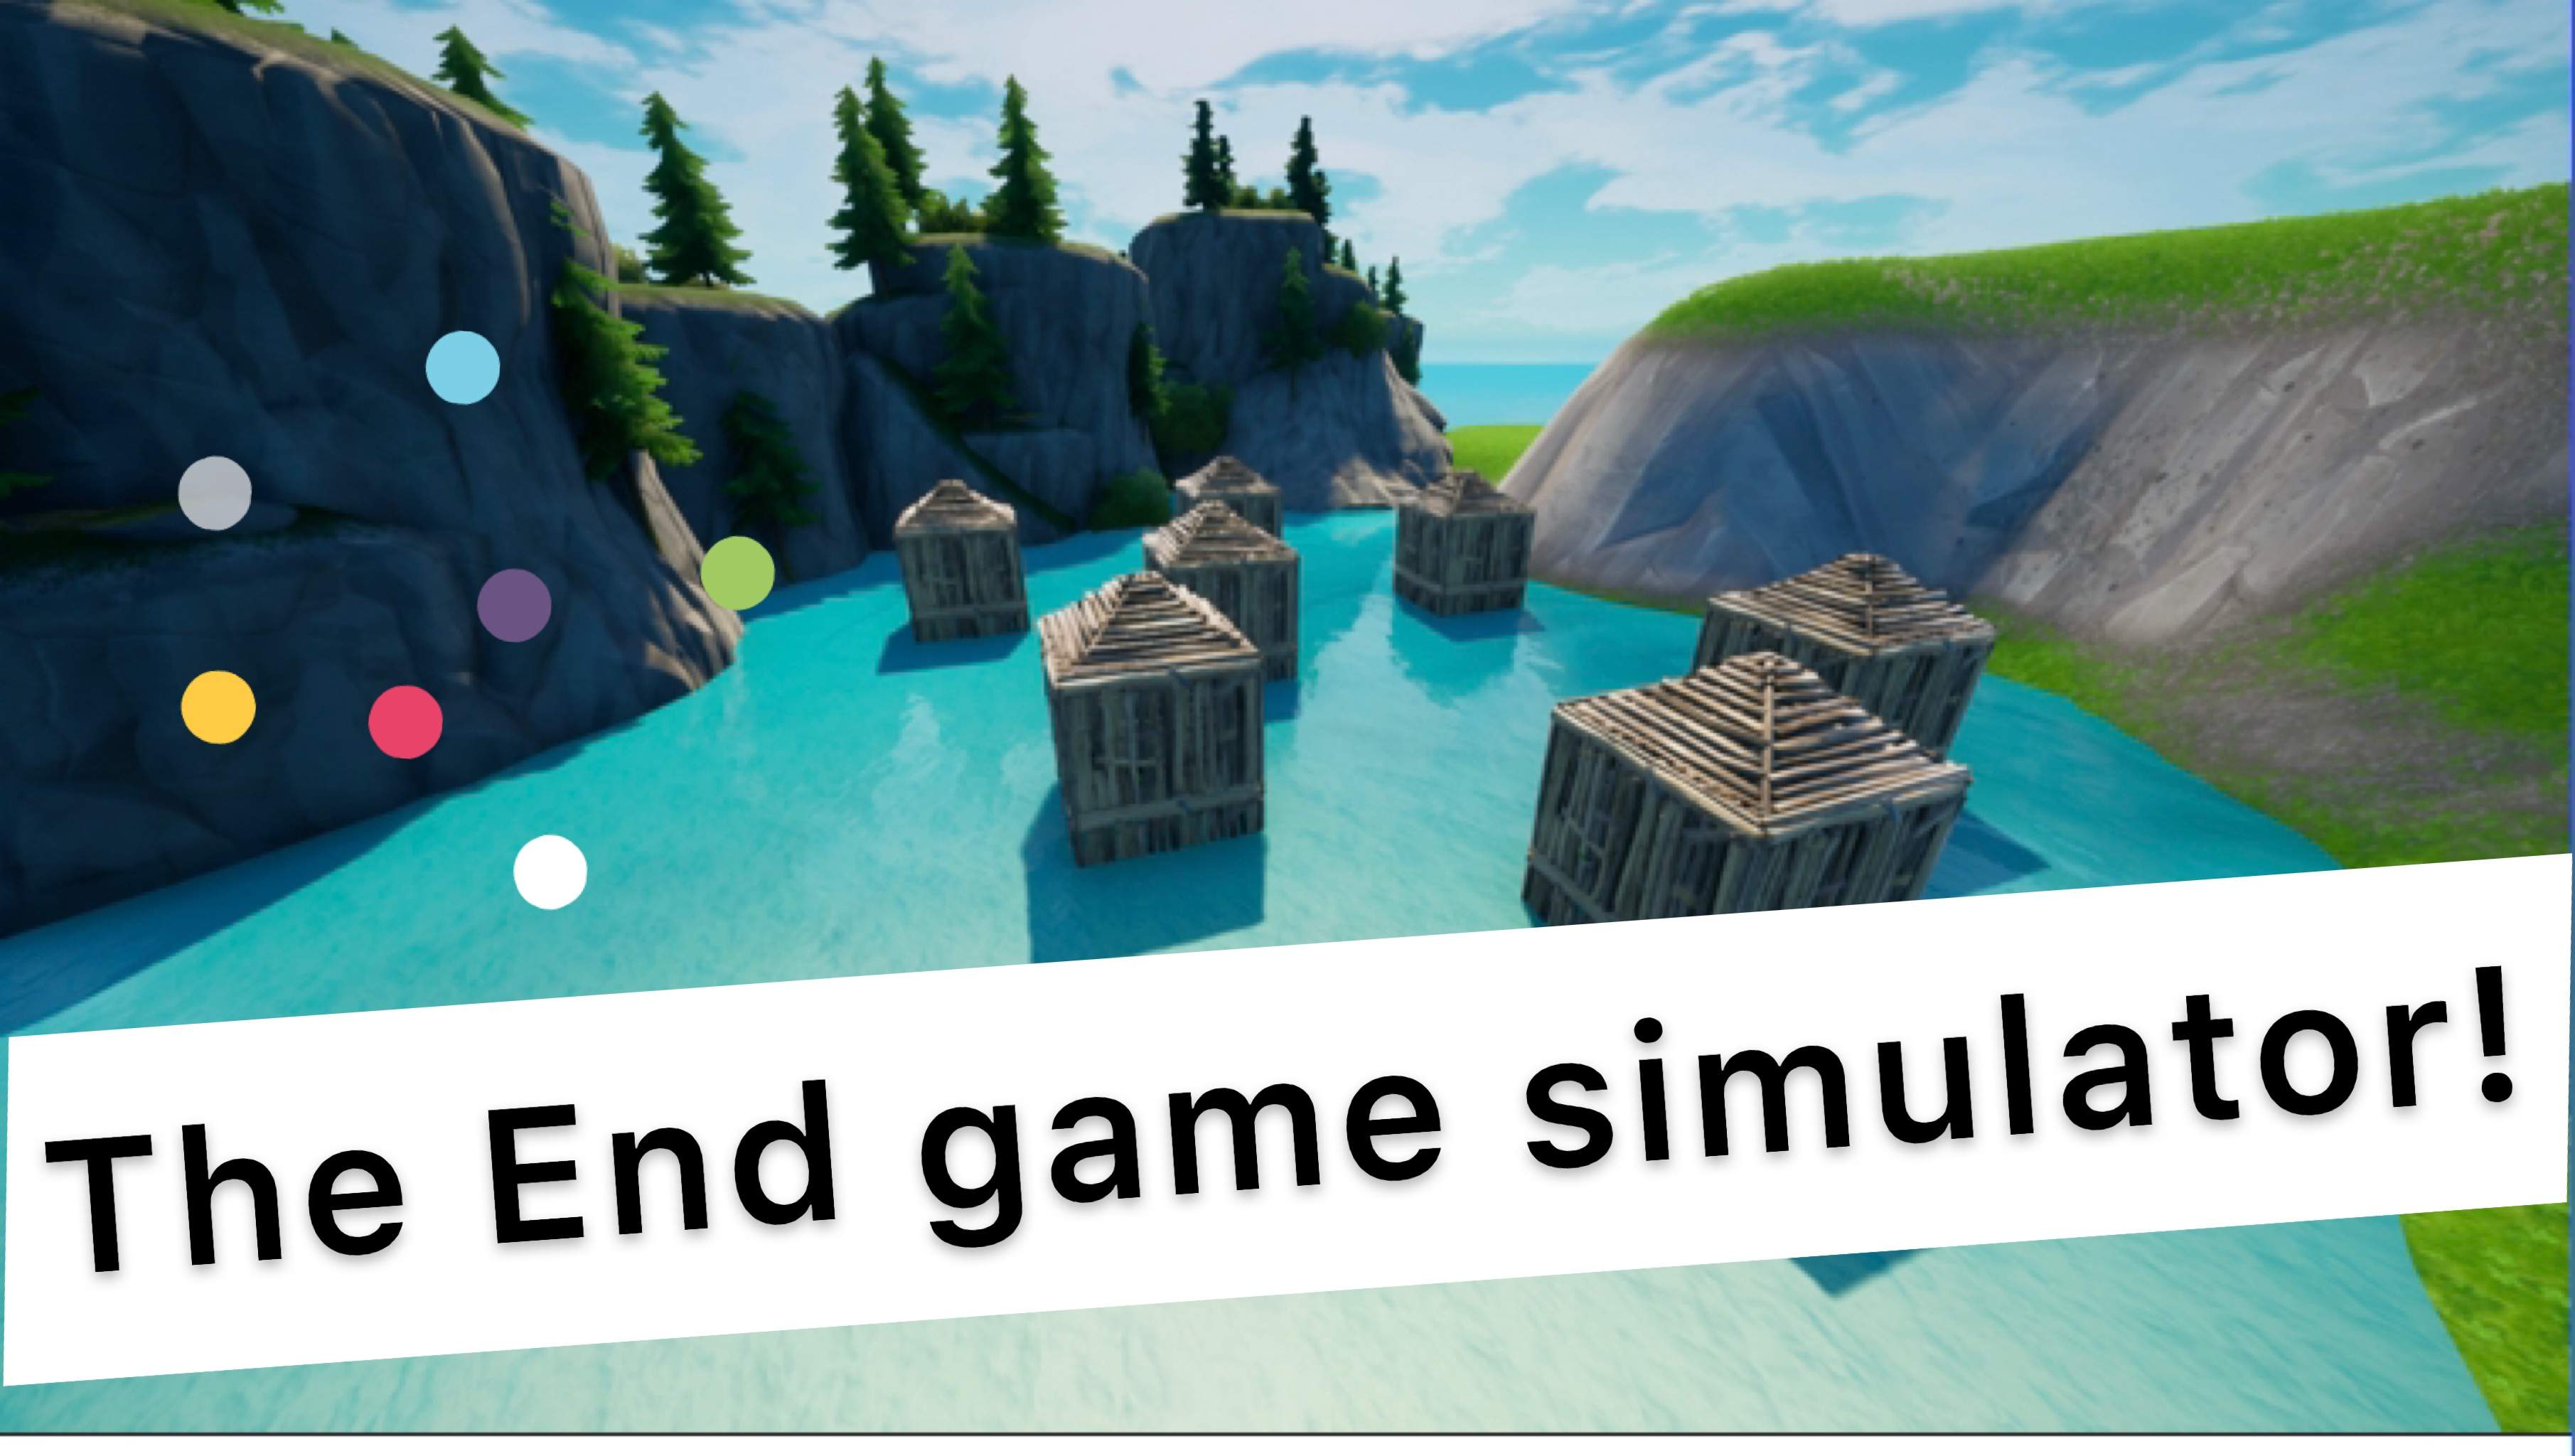 THE END GAME SIMULATOR!